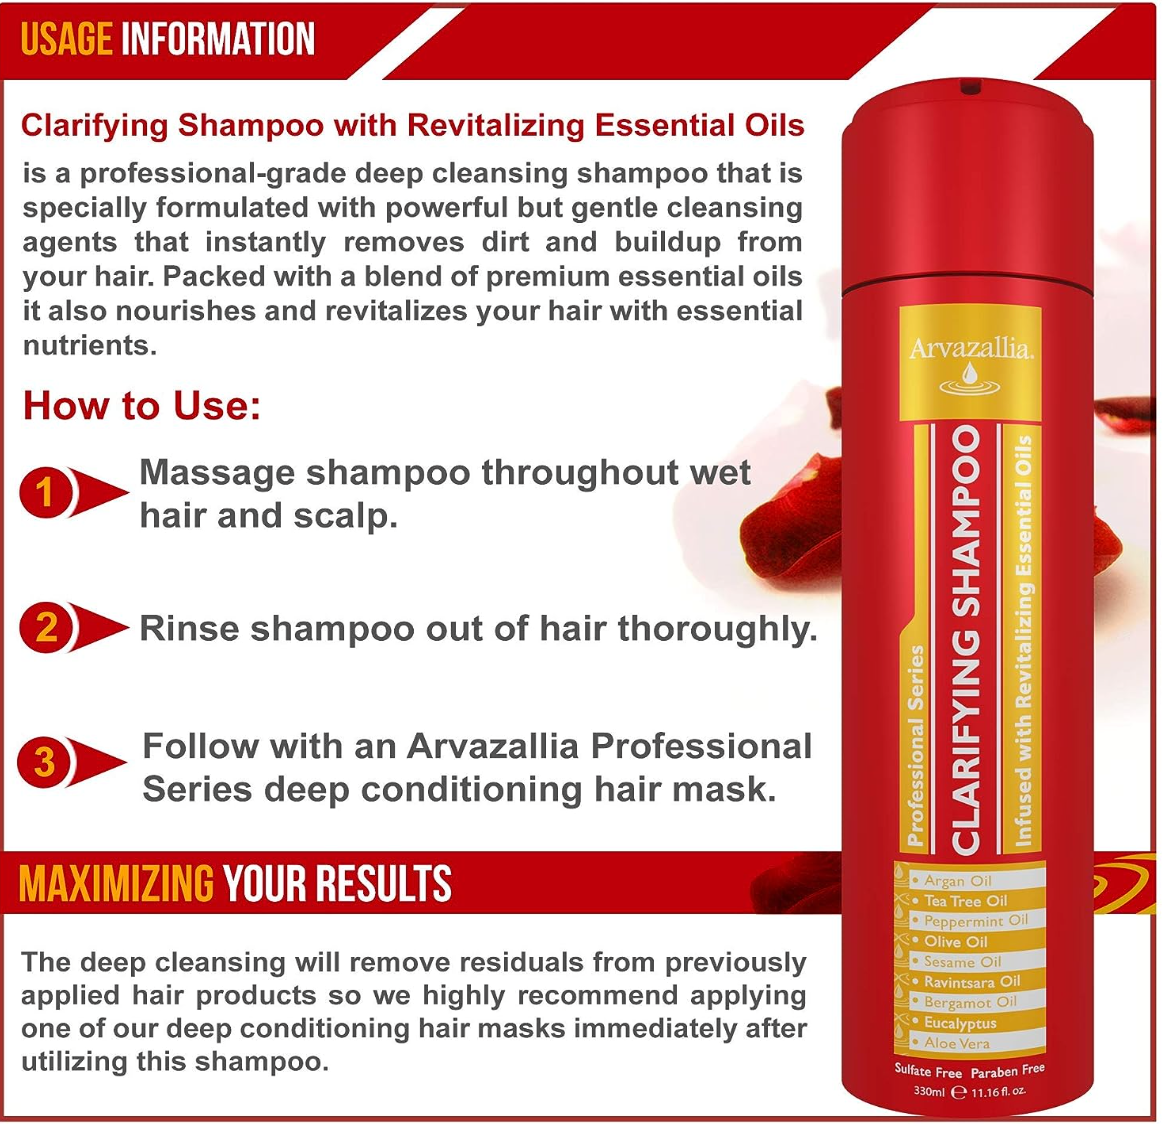 Arvazallia Clarifying Shampoo Infused with Revitalizing Essential Oils - Professional-Grade Anti-Residue Cleanser with Argan Oil , Tea Tree Oil , Peppermint Oil , Olive Oil , Sesame Oil , Aloe